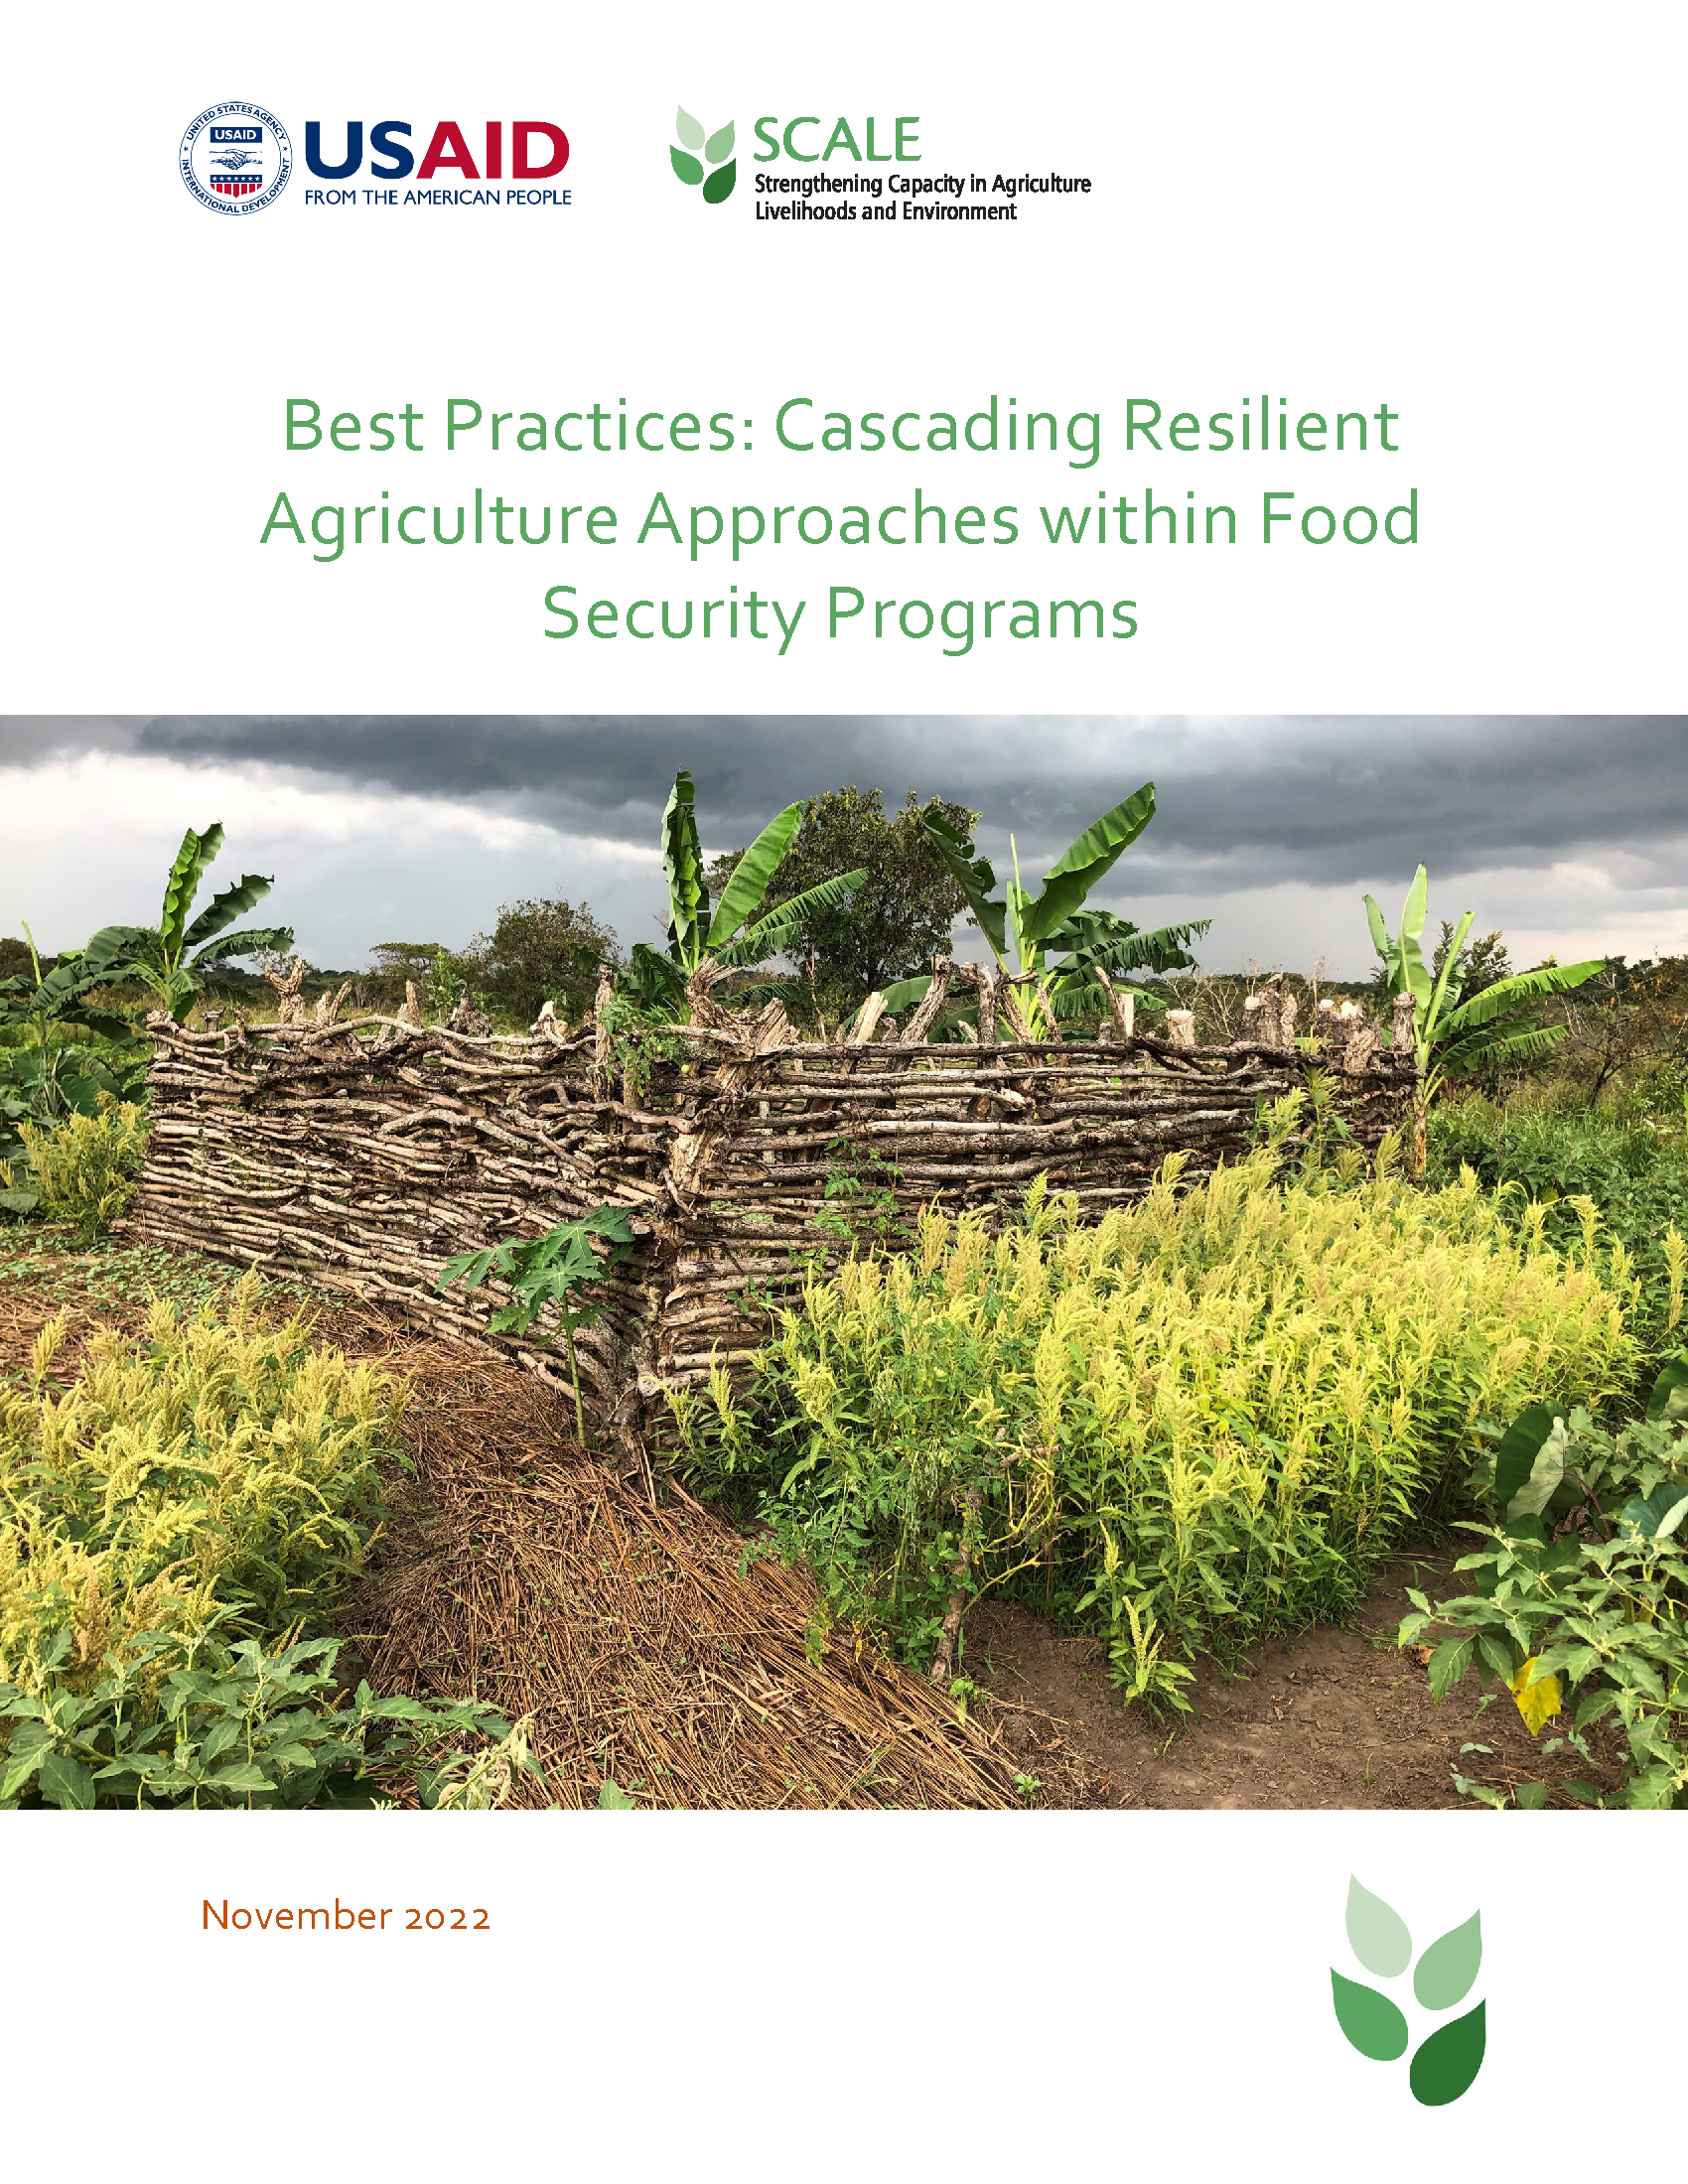 Cover page for Best Practices in Cascading resilient Agriculture